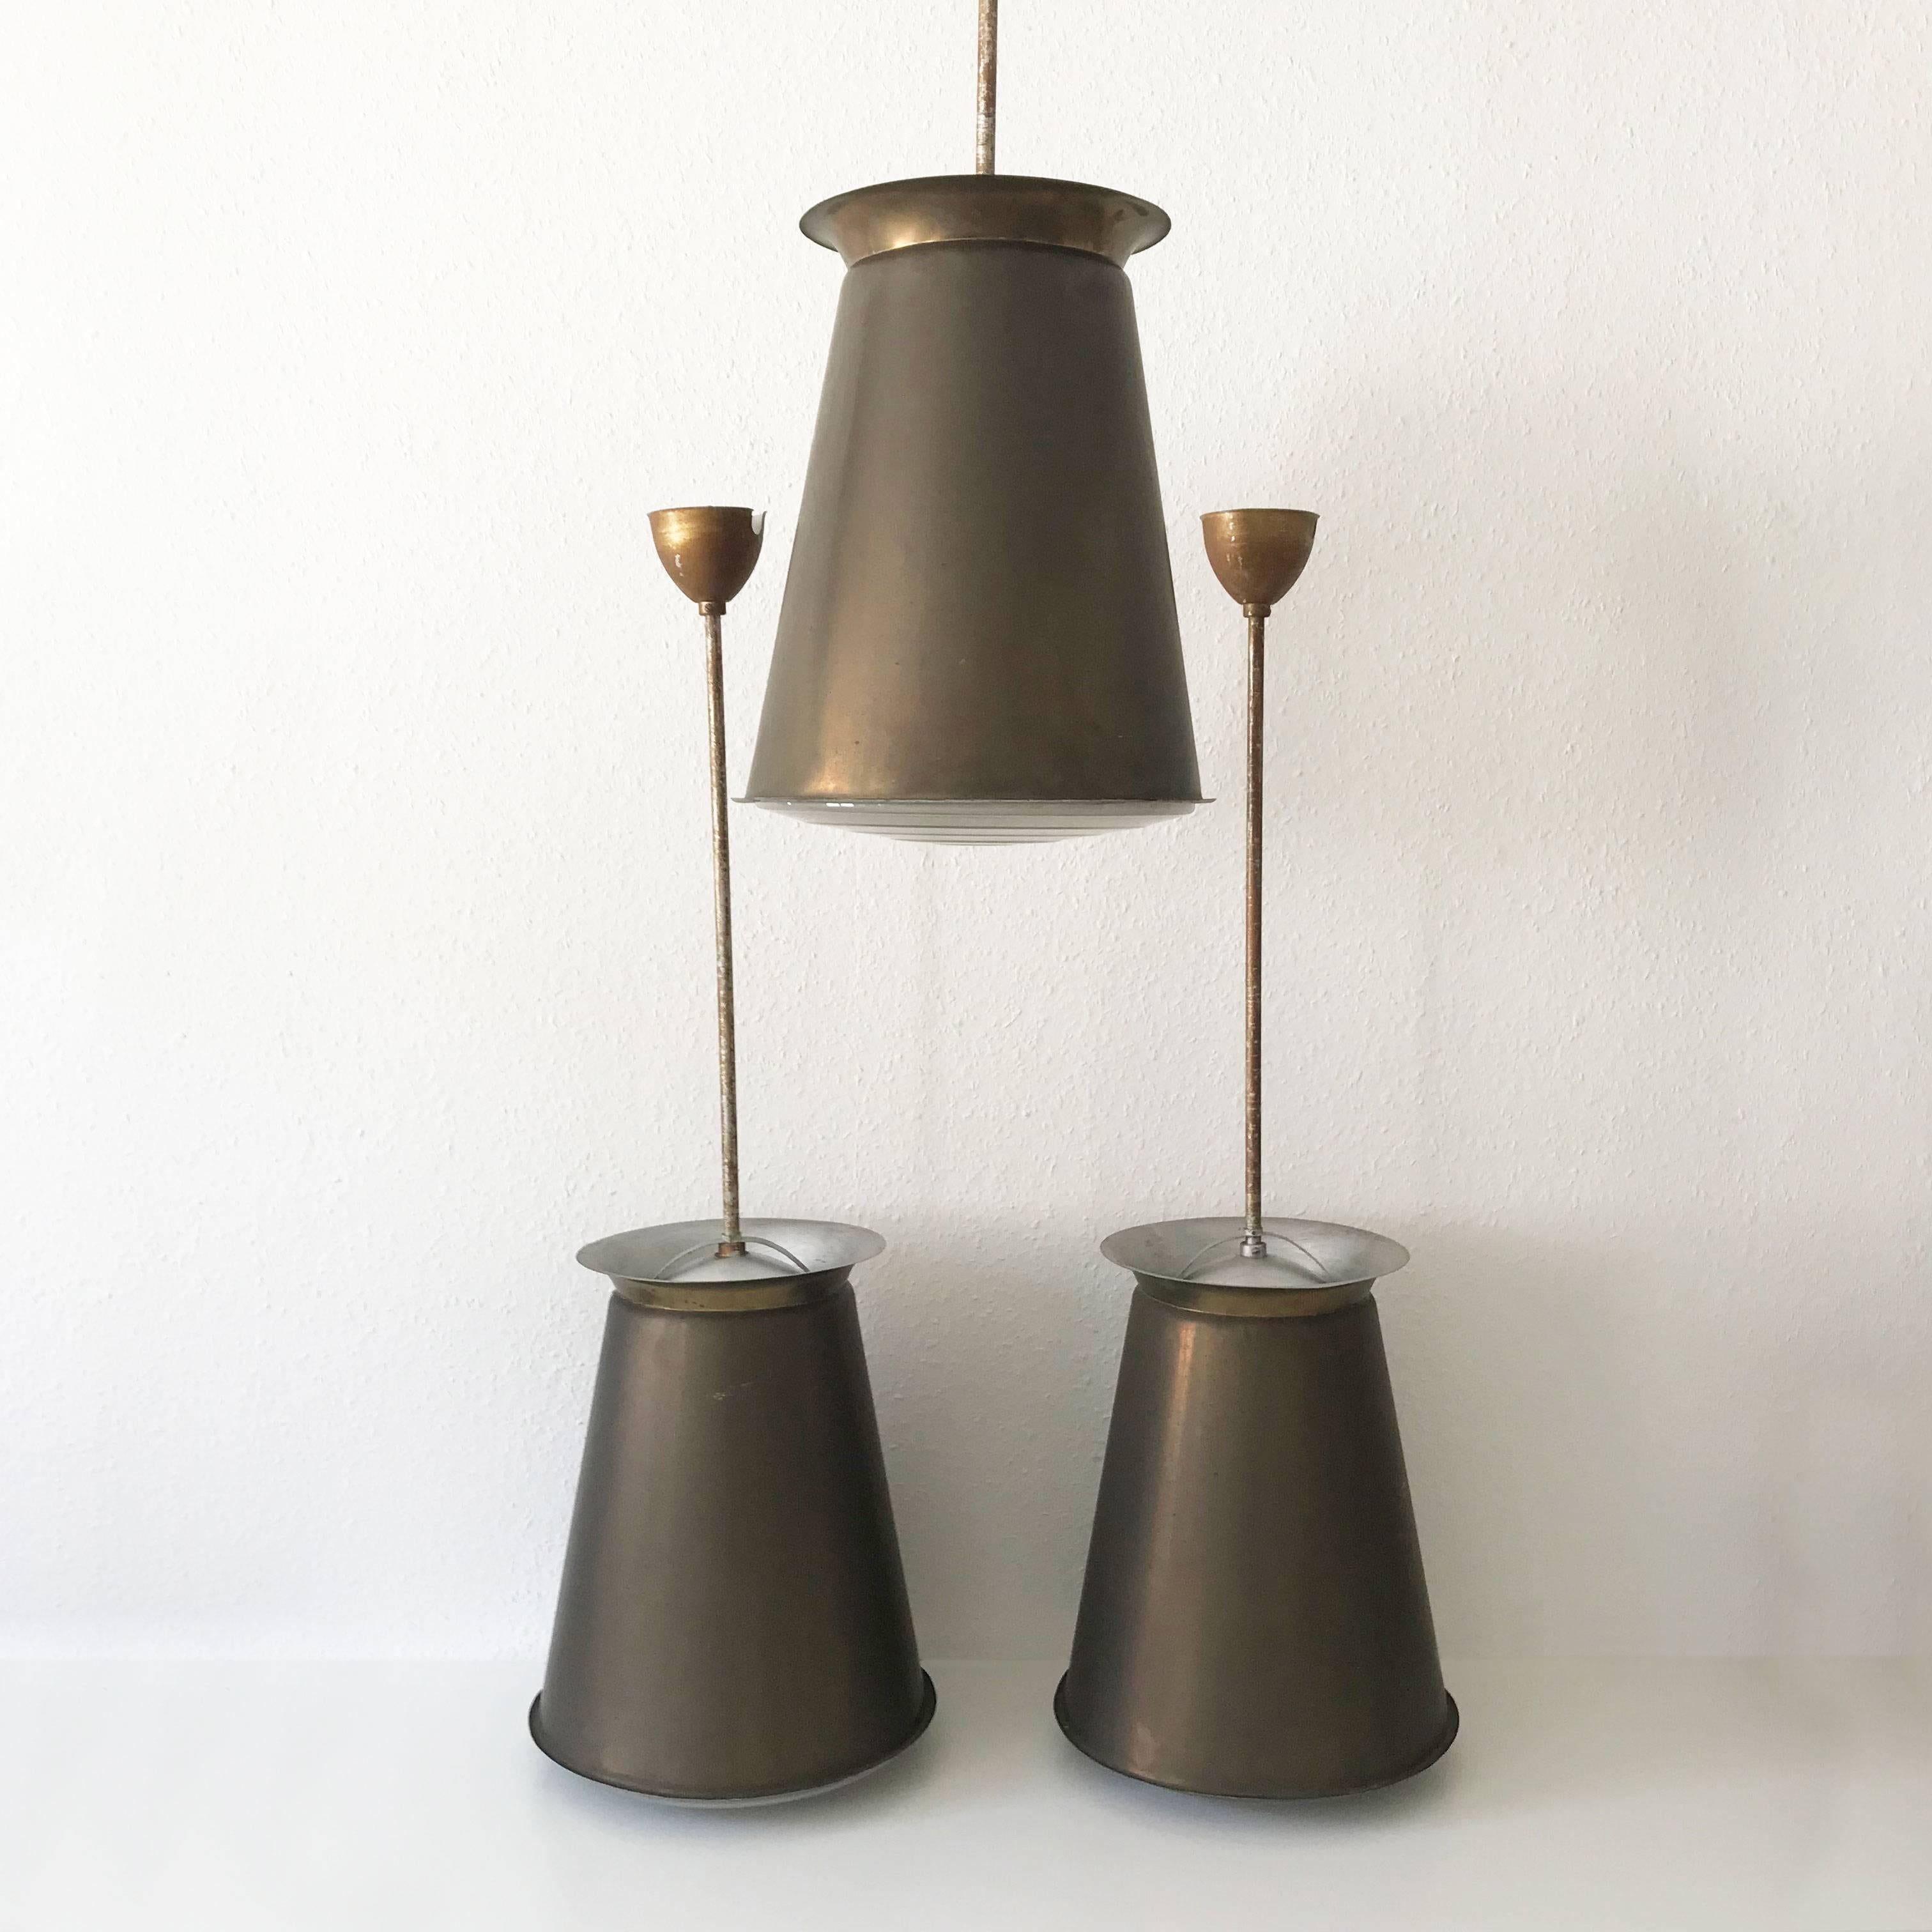 Exceptional Bauhaus Pendant Lamp by Adolf Meyer for Zeiss Ikon, 1930s, Germany For Sale 7